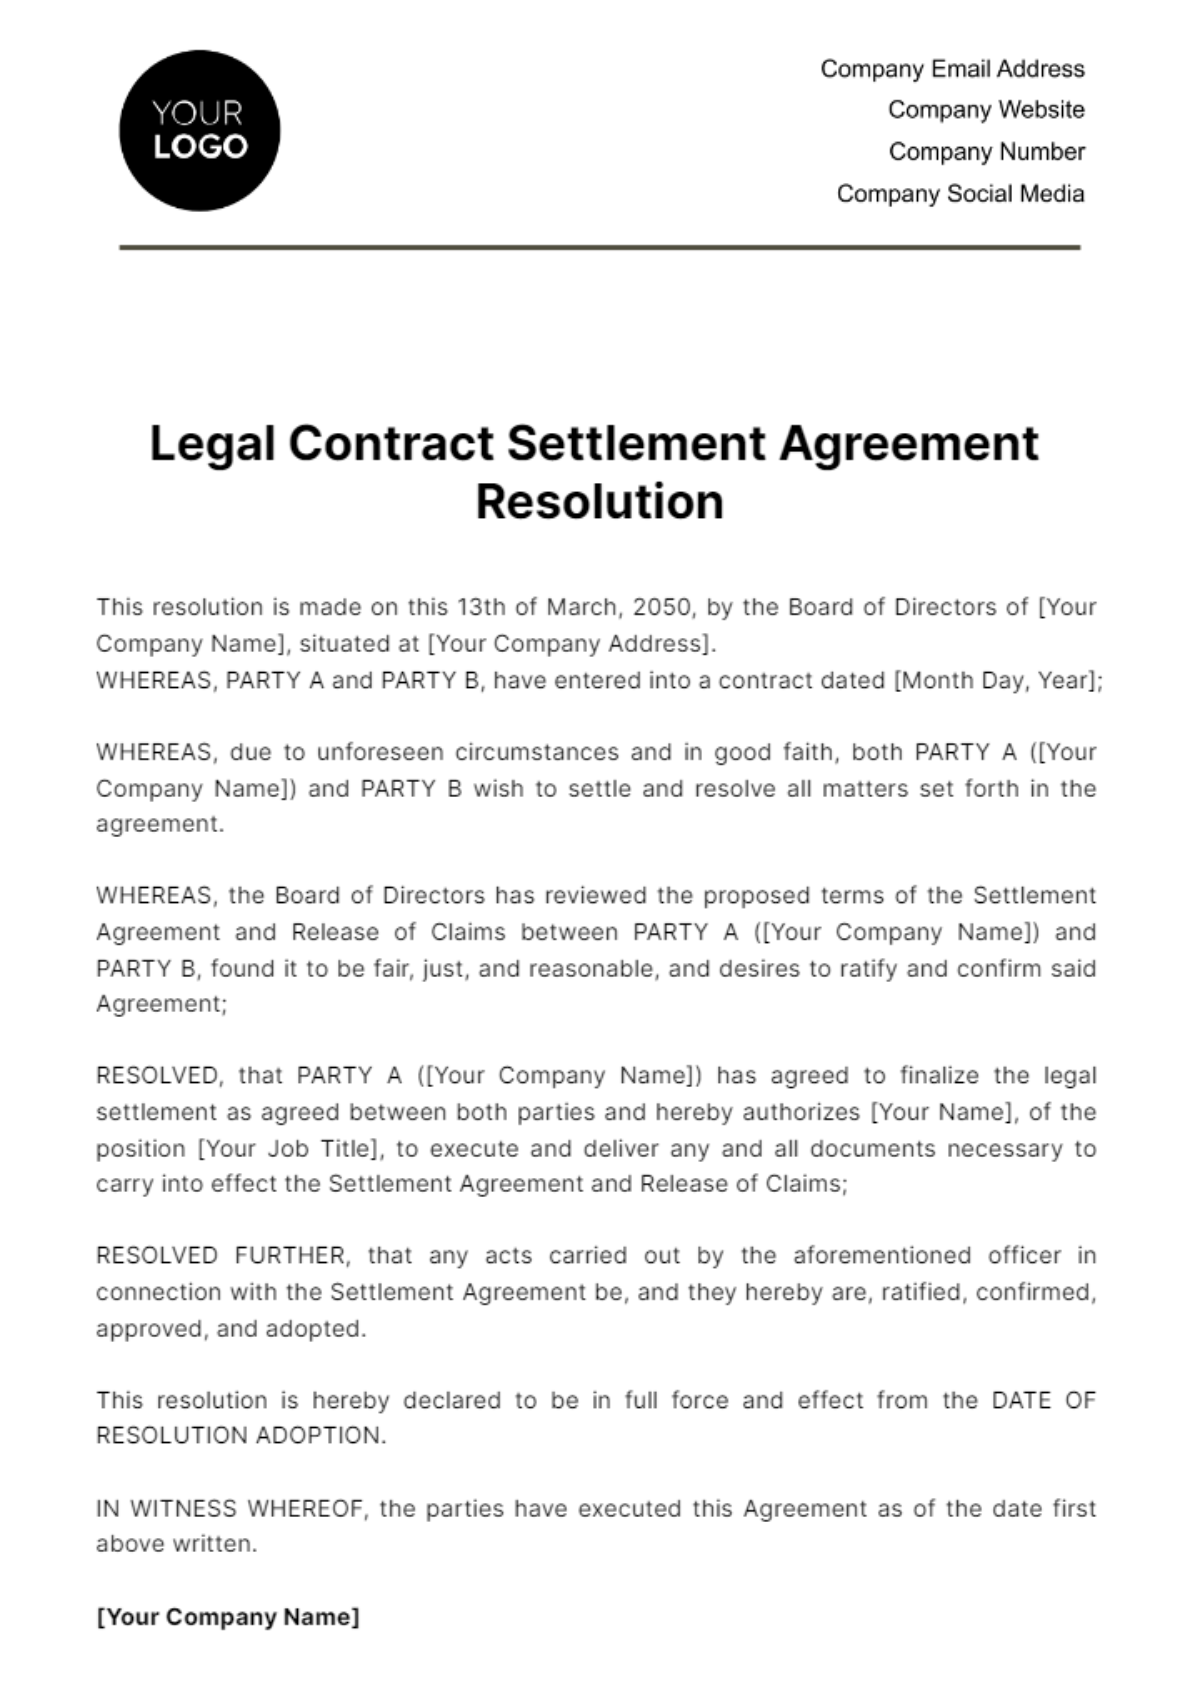 Legal Contract Settlement Agreement Resolution Template